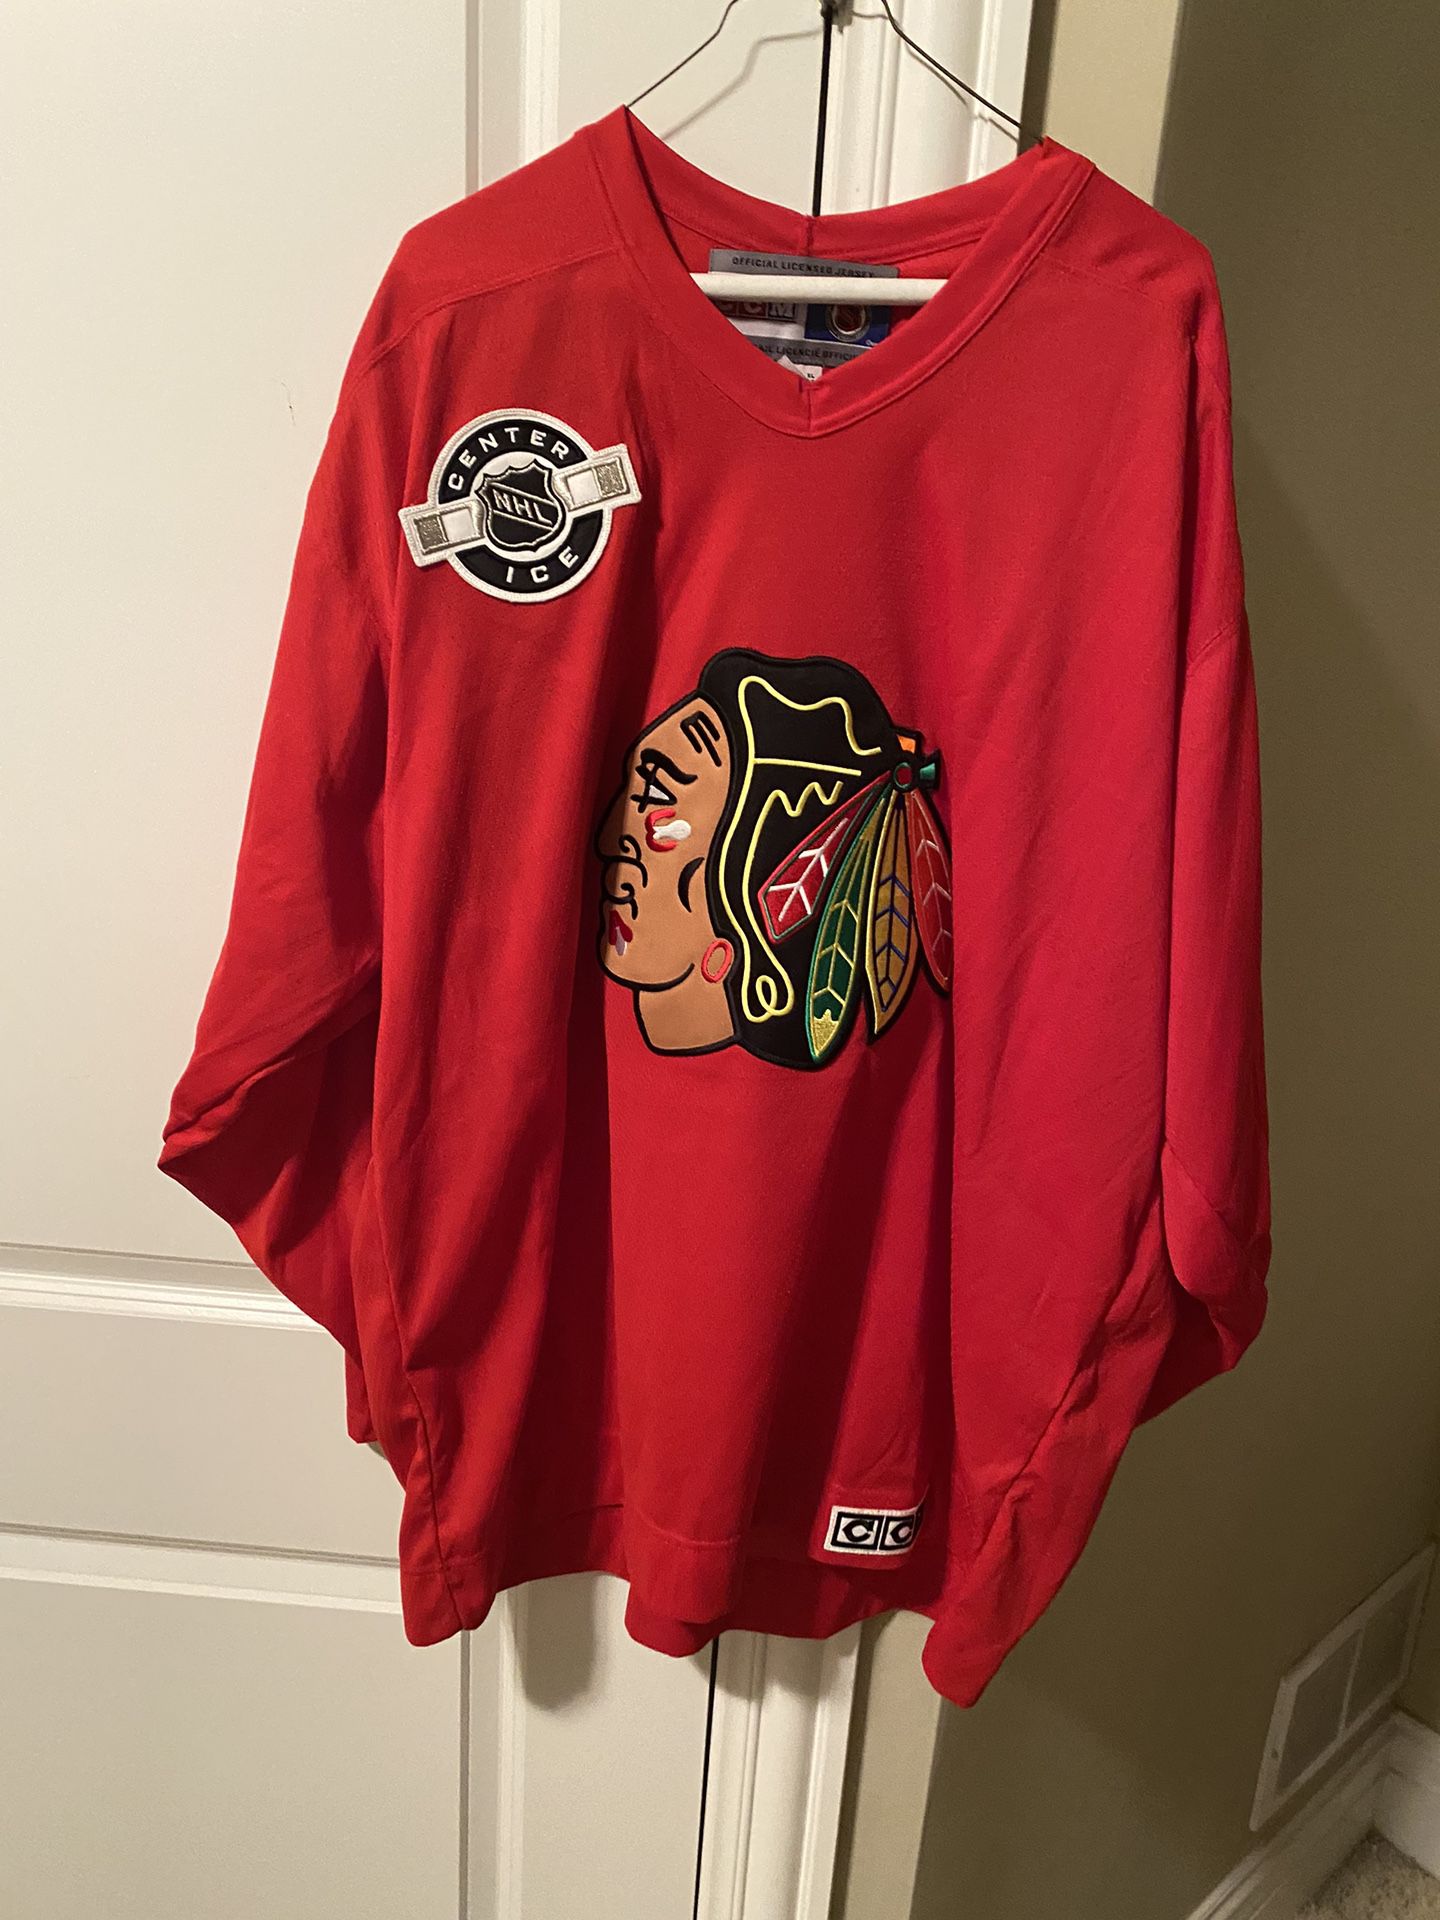 Chicago Blackhawks jersey for Sale in Chicago, IL - OfferUp